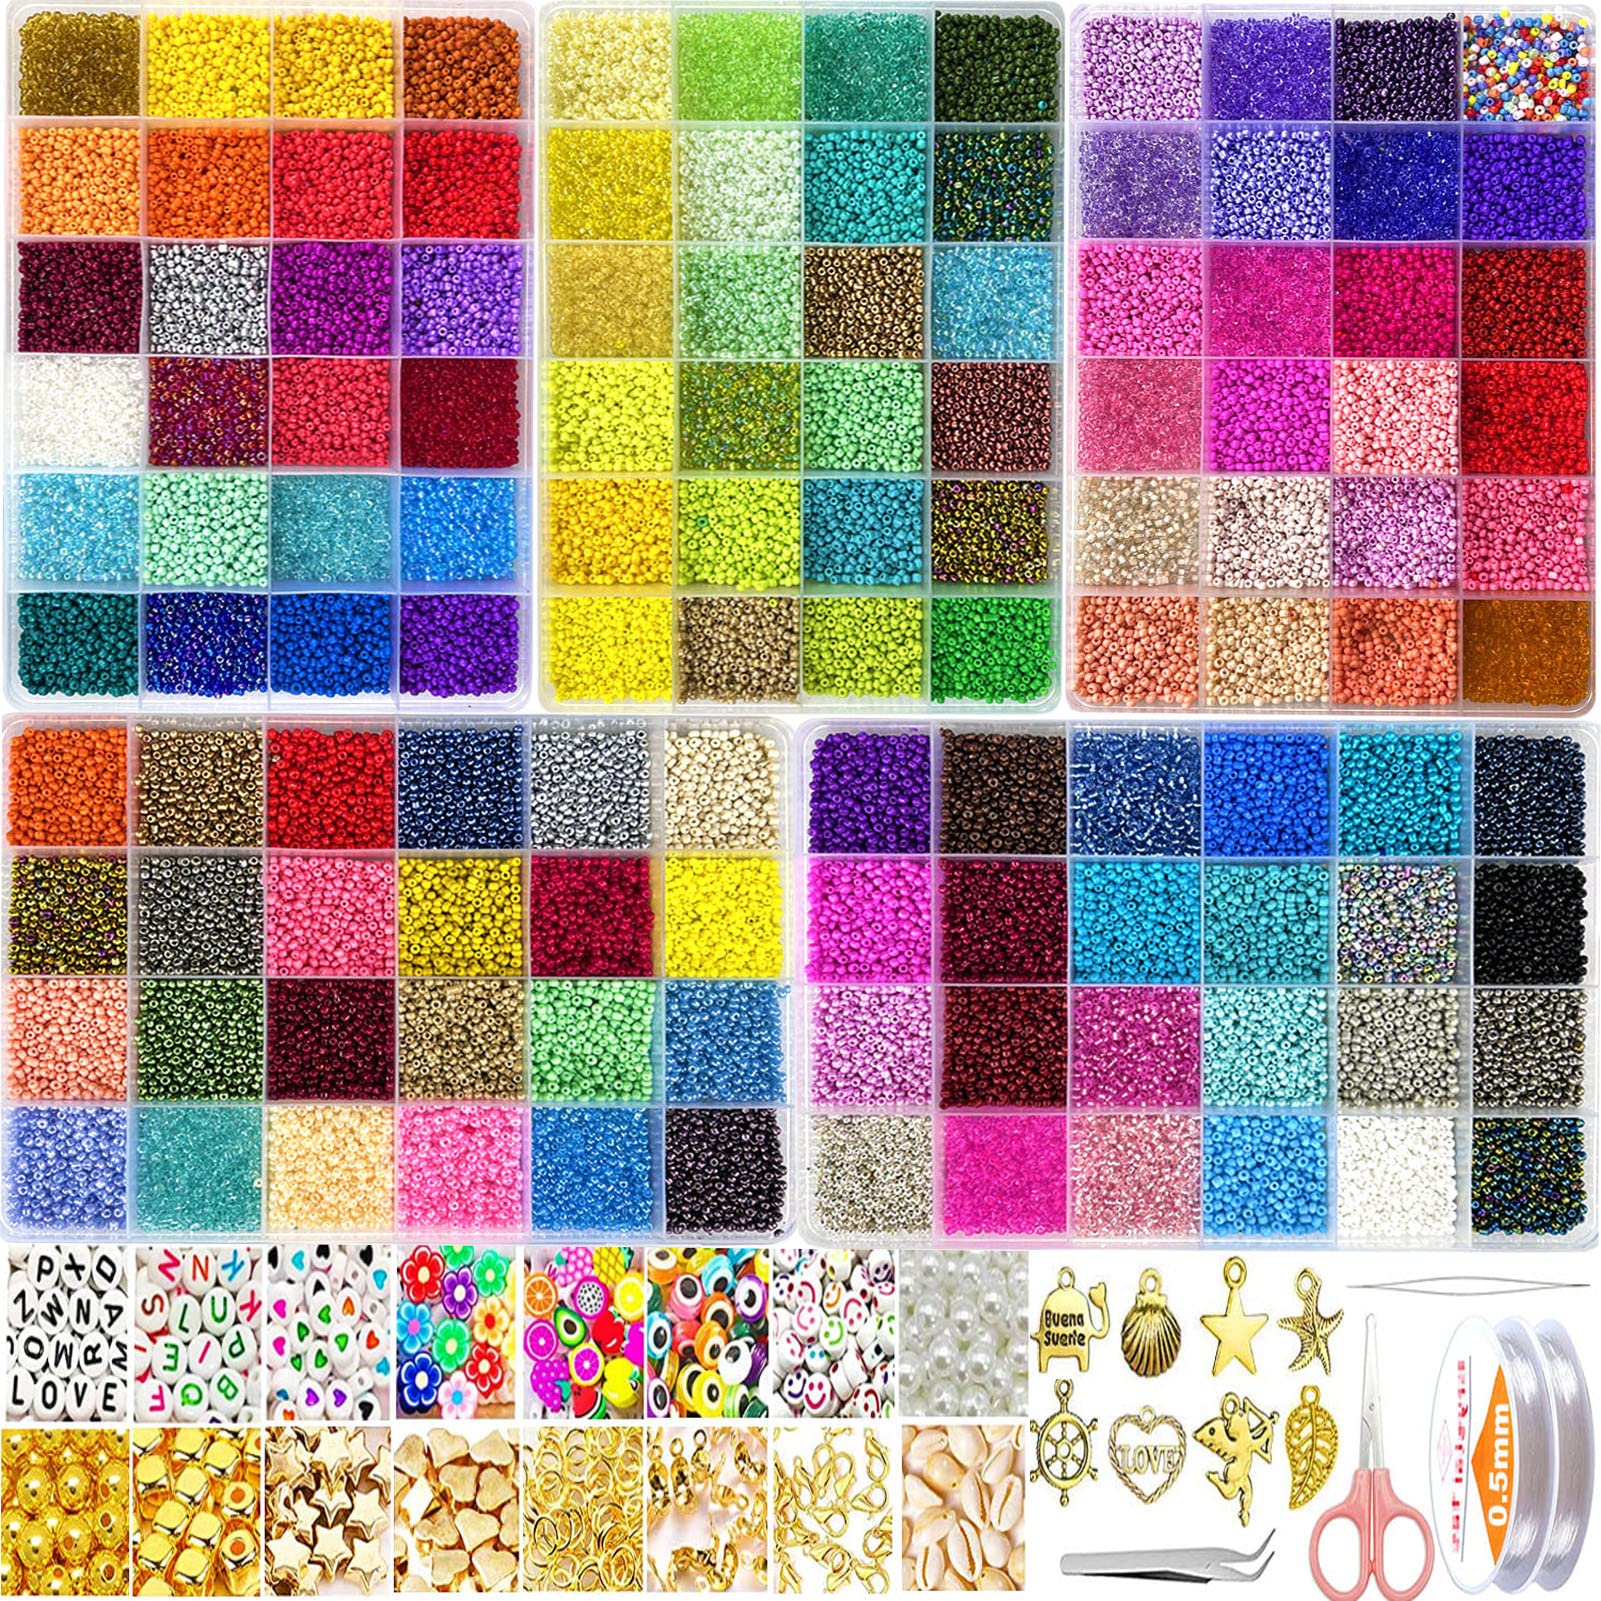 Jewelry Making Kit Glass Seed Beads Supplies Letter Beads Pearl